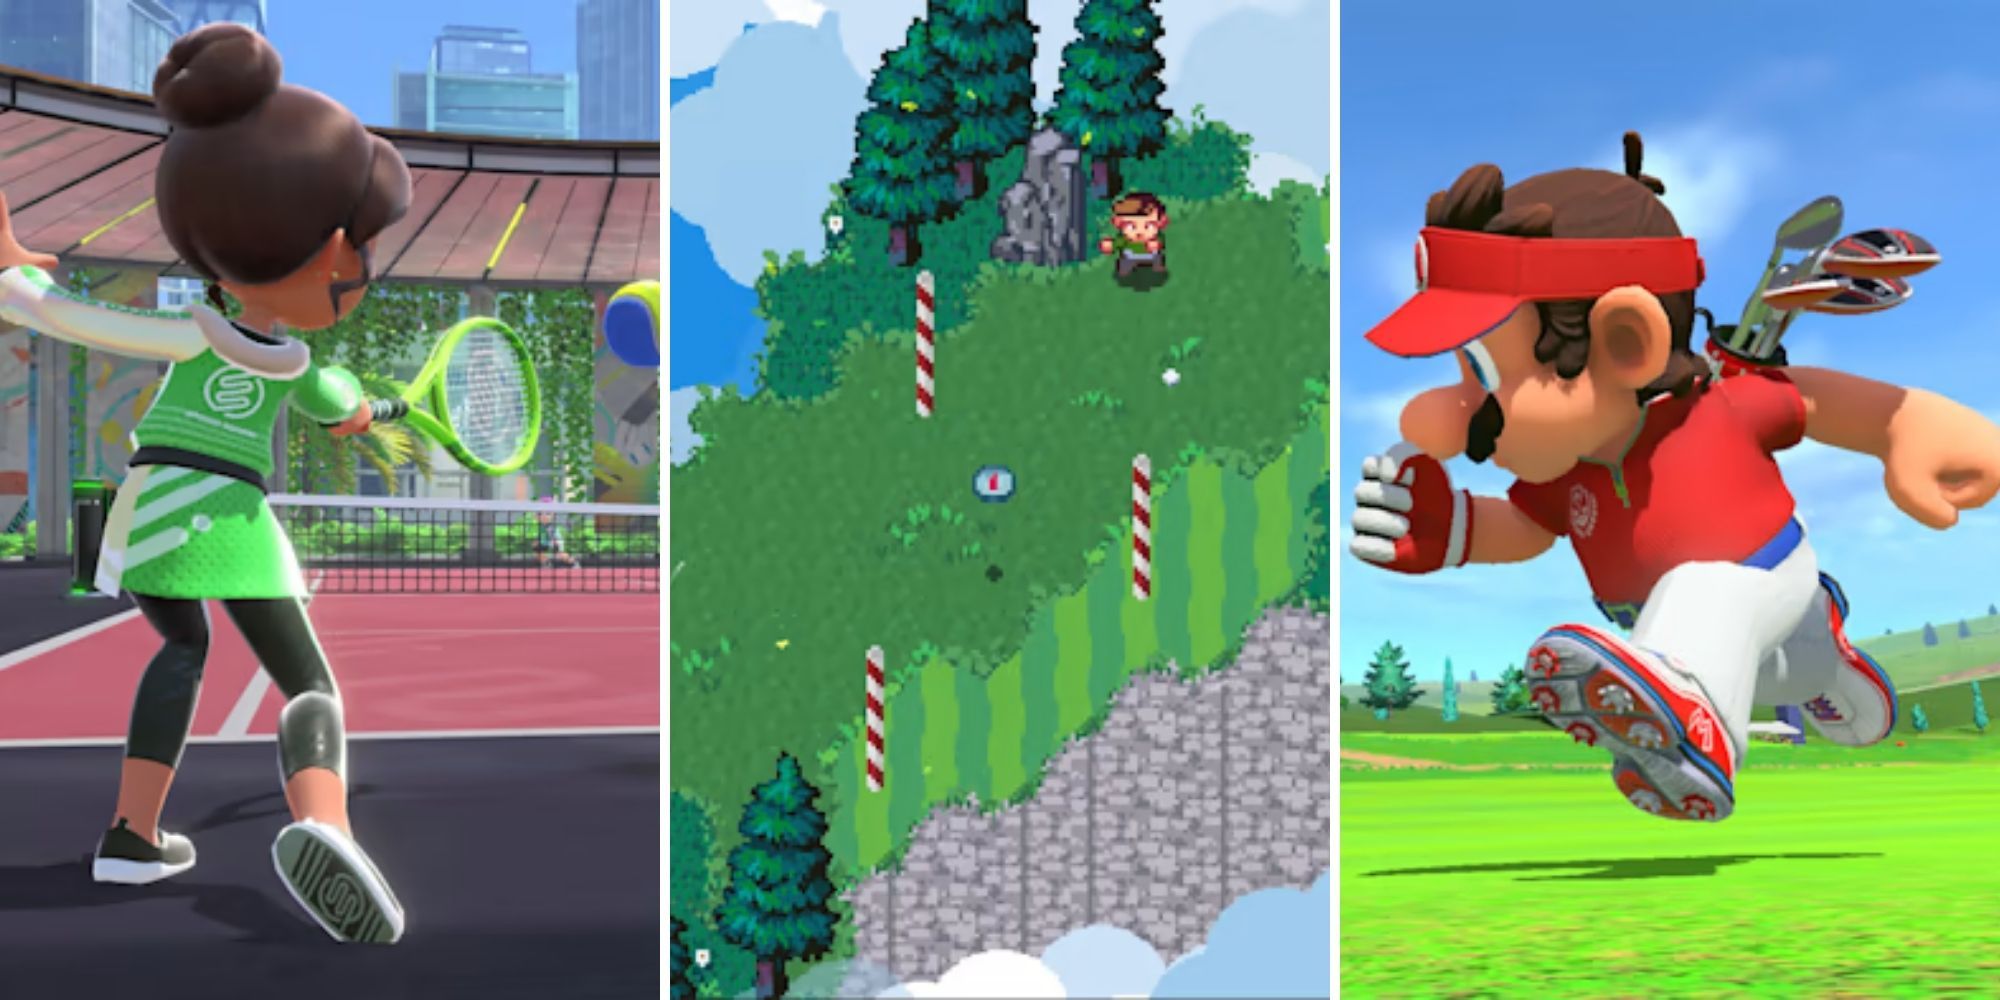 A Mii takes a swing, Golfer stands on the course, Mario Runs